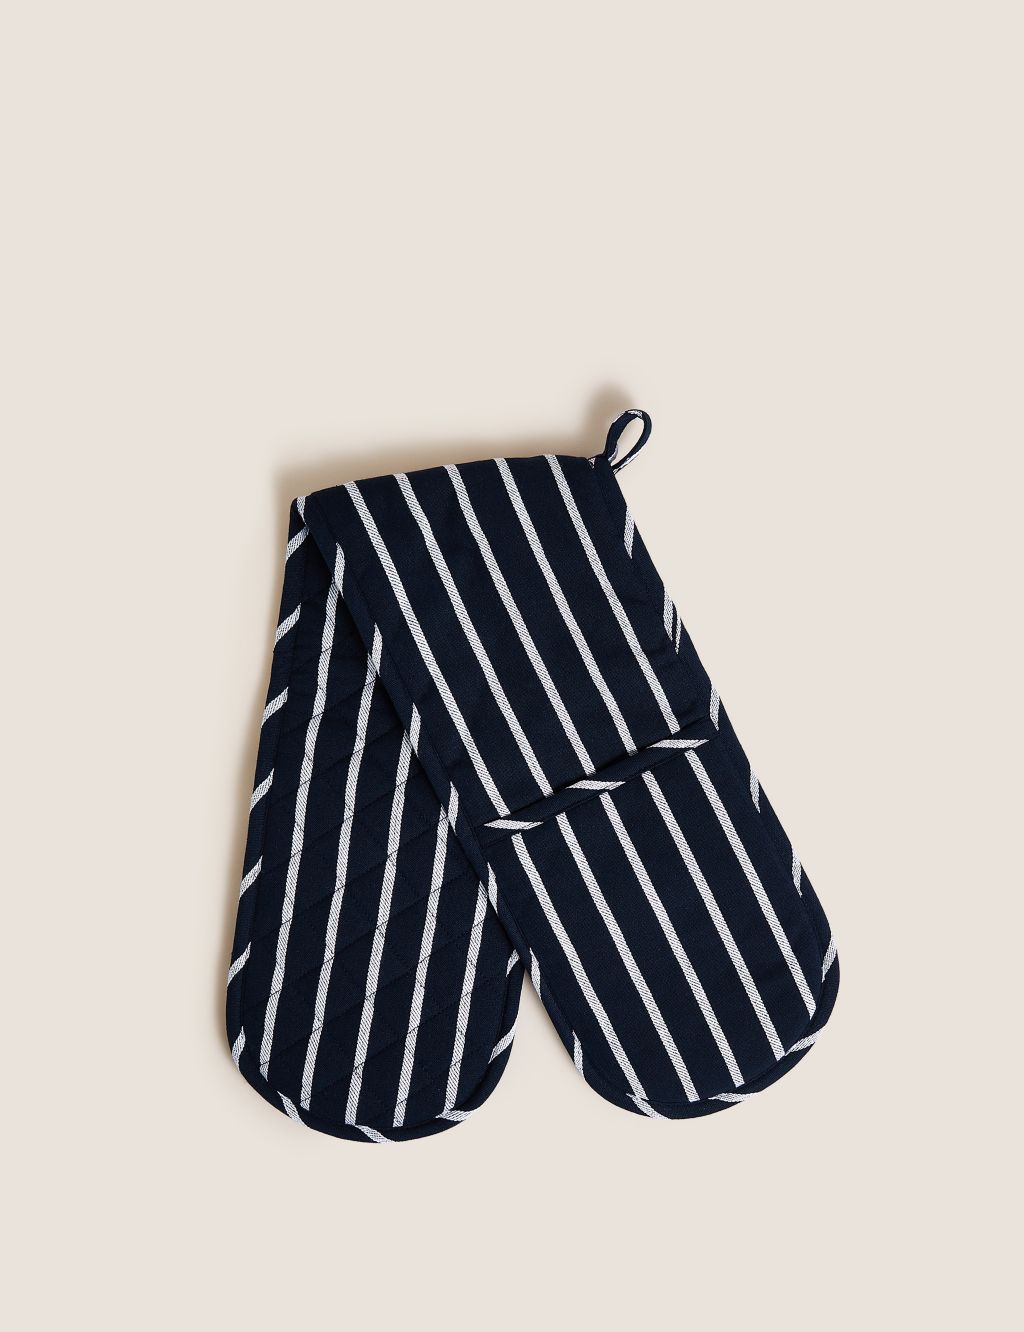 Striped Double Oven Glove image 1